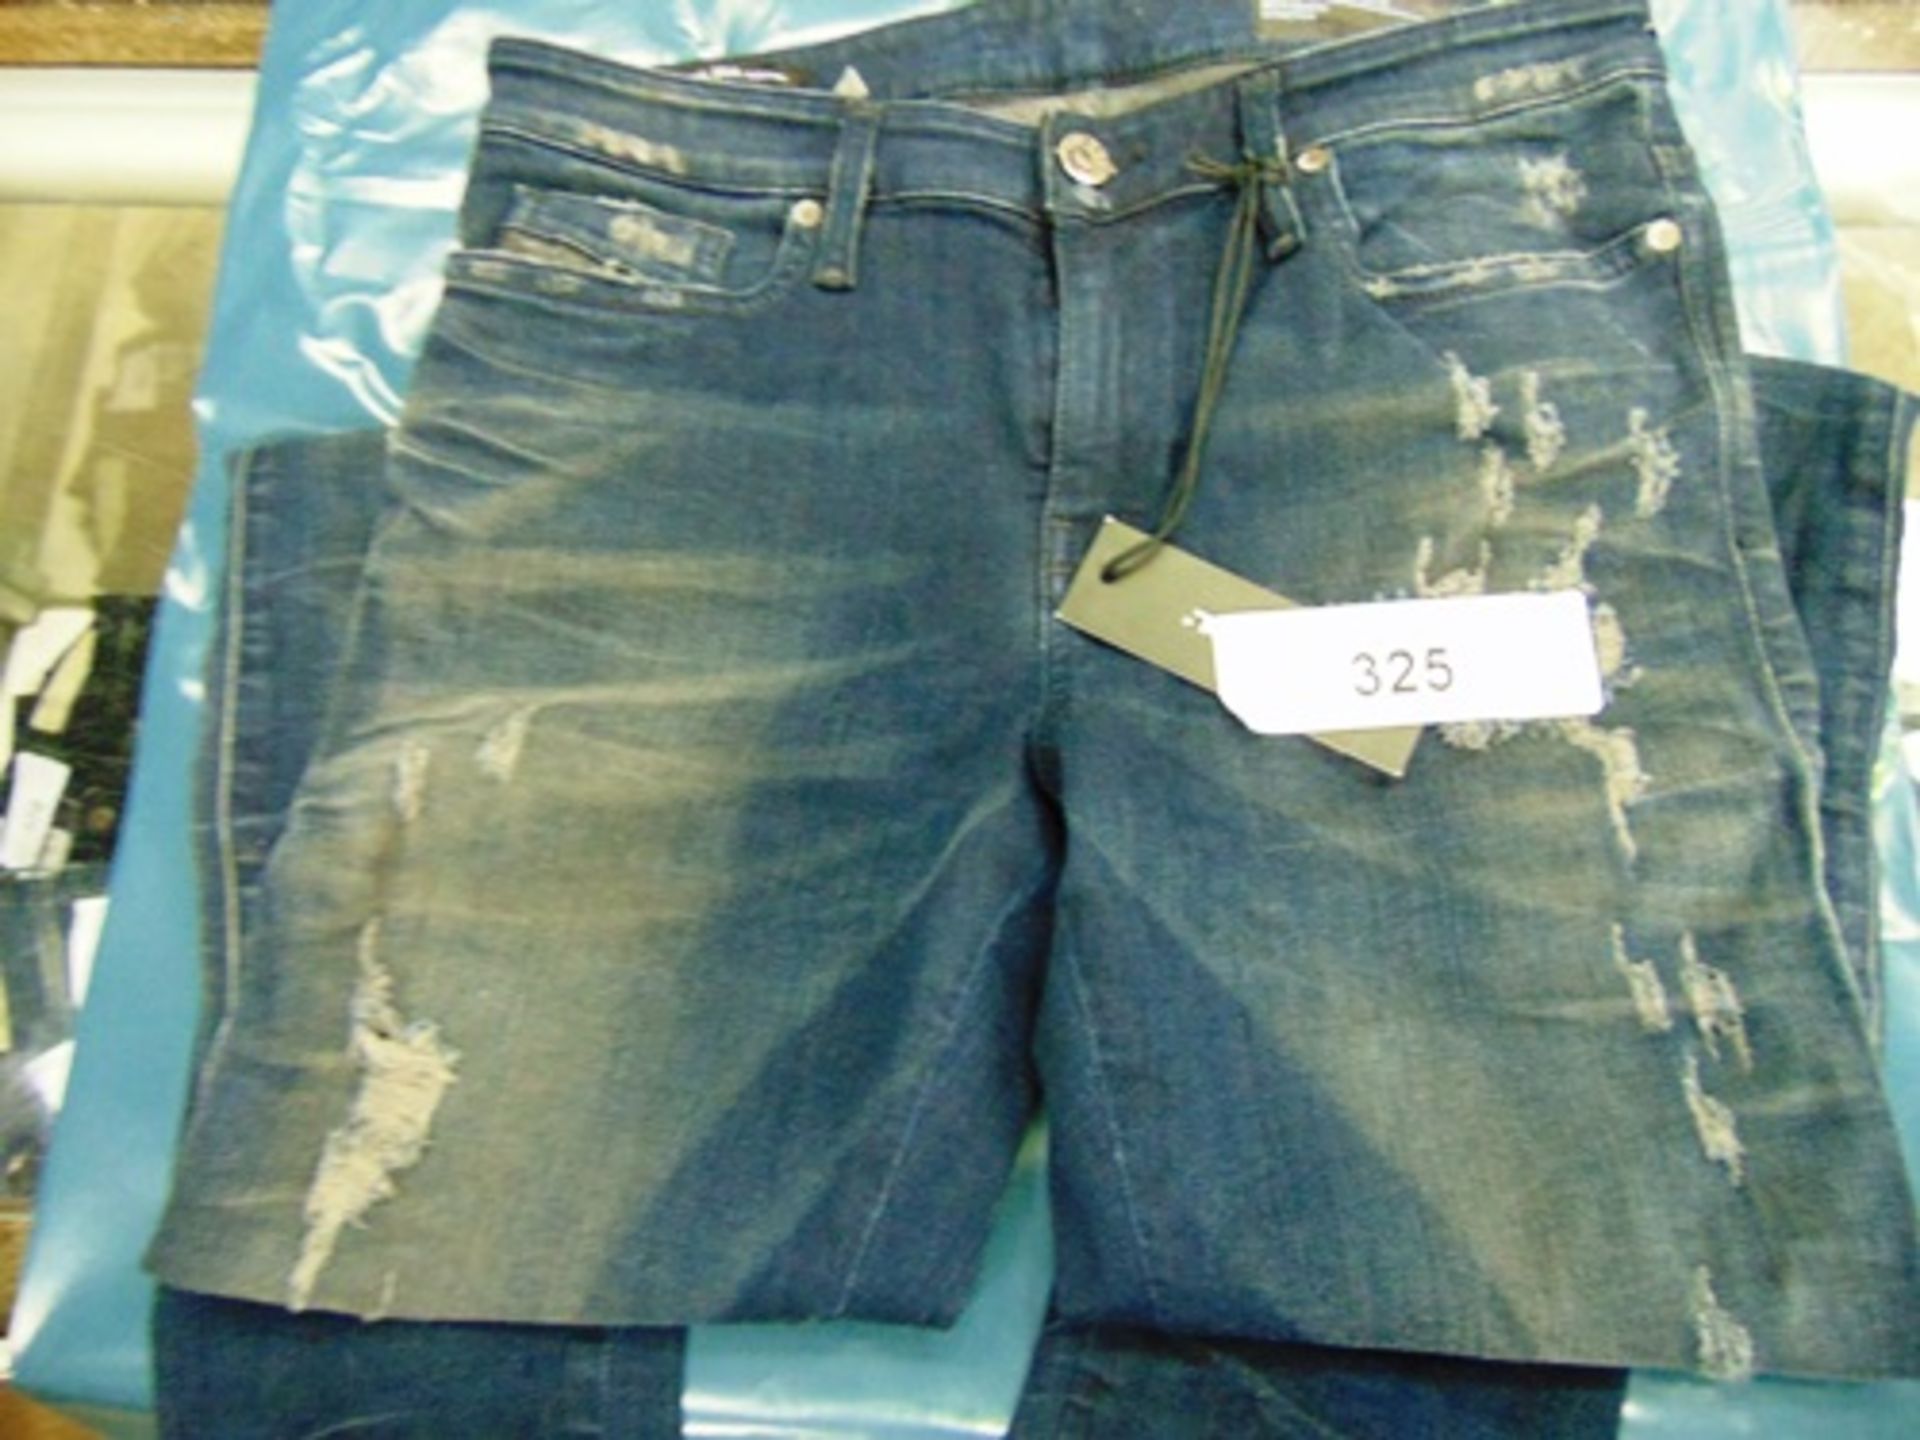 1 x pair of Diesel skinzee L.32 trousers, size 28, length 32, RRP £140 - New with tags (CC1)